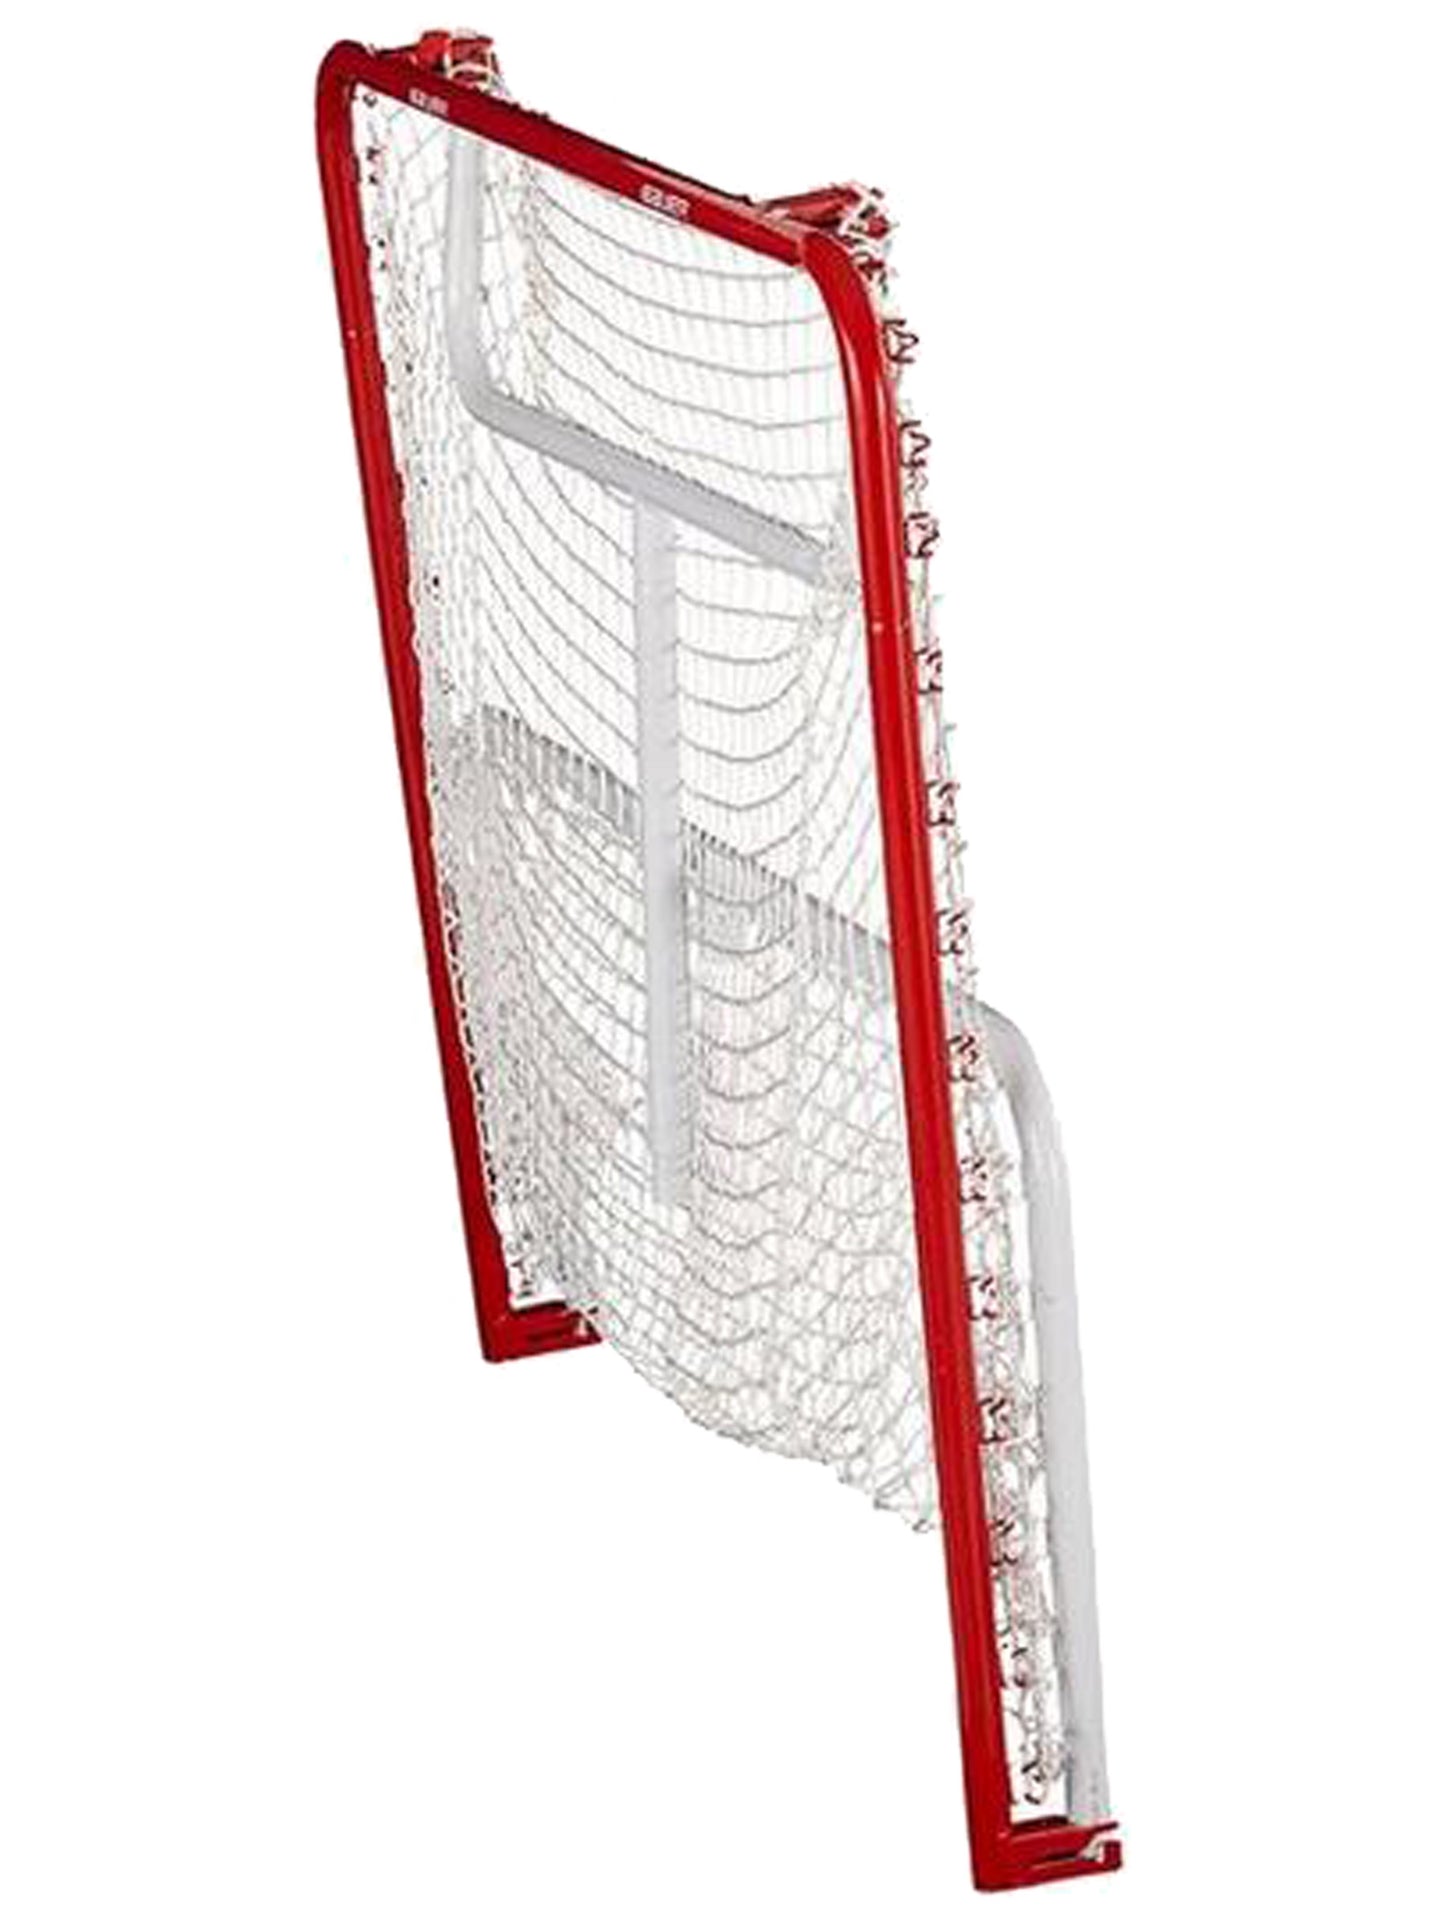 Bauer Official Performance Steel Hockey Goal 6' x 4' – SkatePLUS Pty Limited